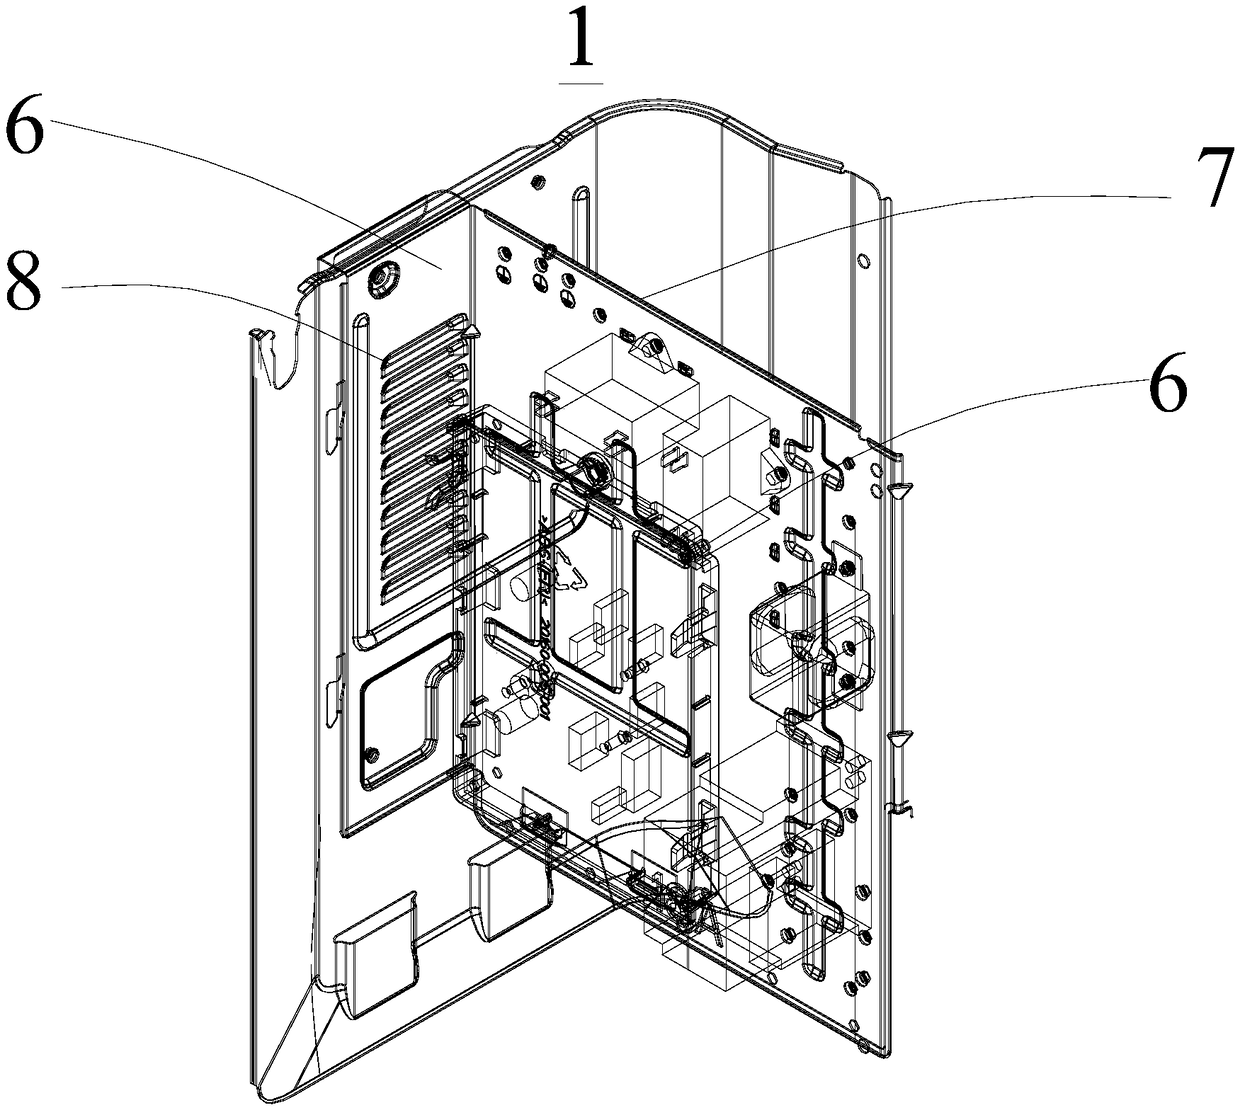 Cooling structure of electric control module and air conditioner outdoor unit